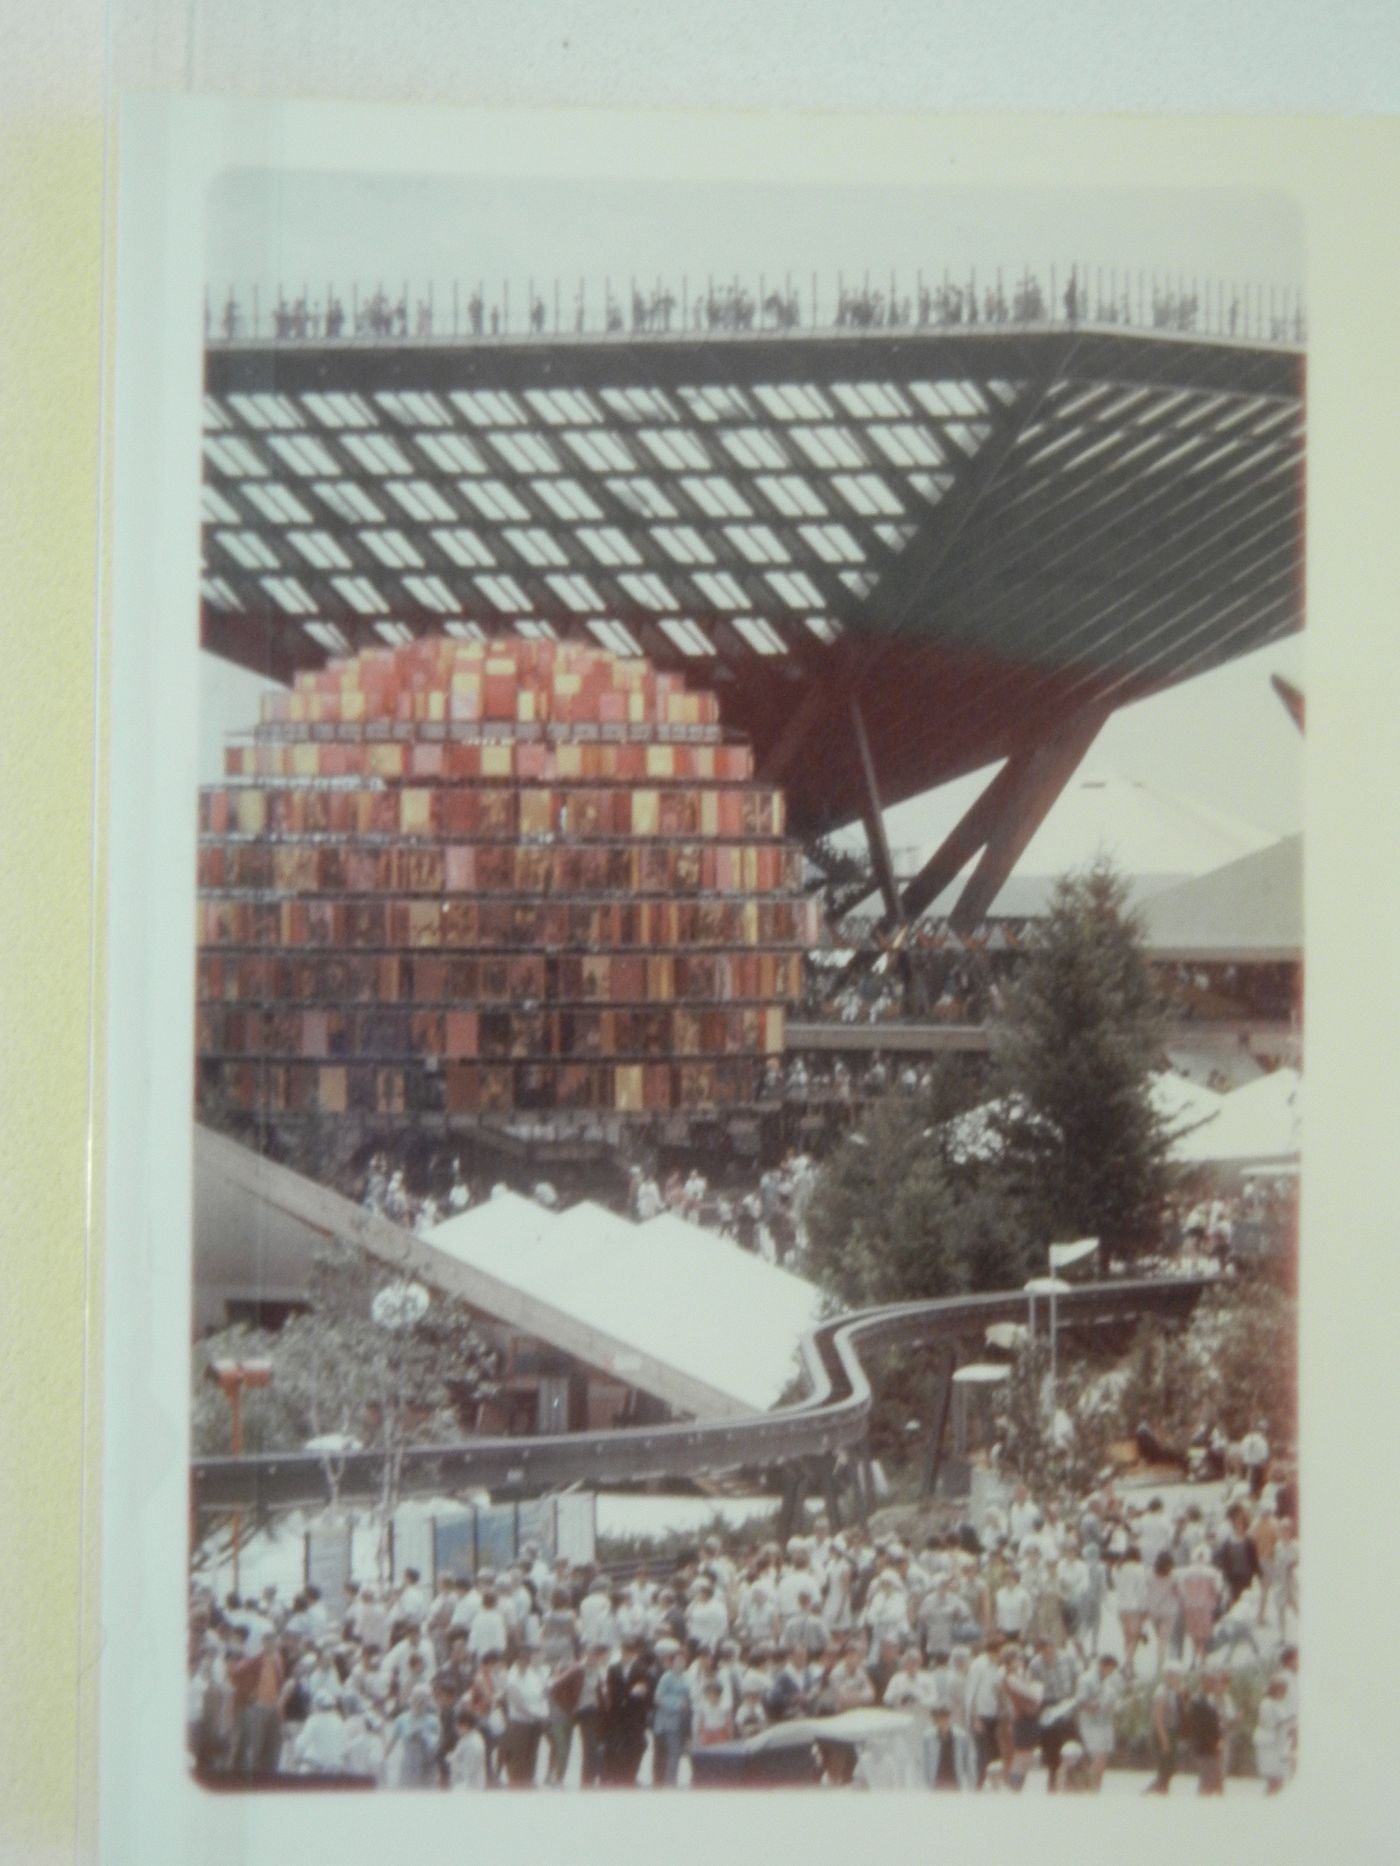 View of the Katimavik and of the People of Canada Tree at the Canada's Pavilion, Expo 67, Montréal, Québec